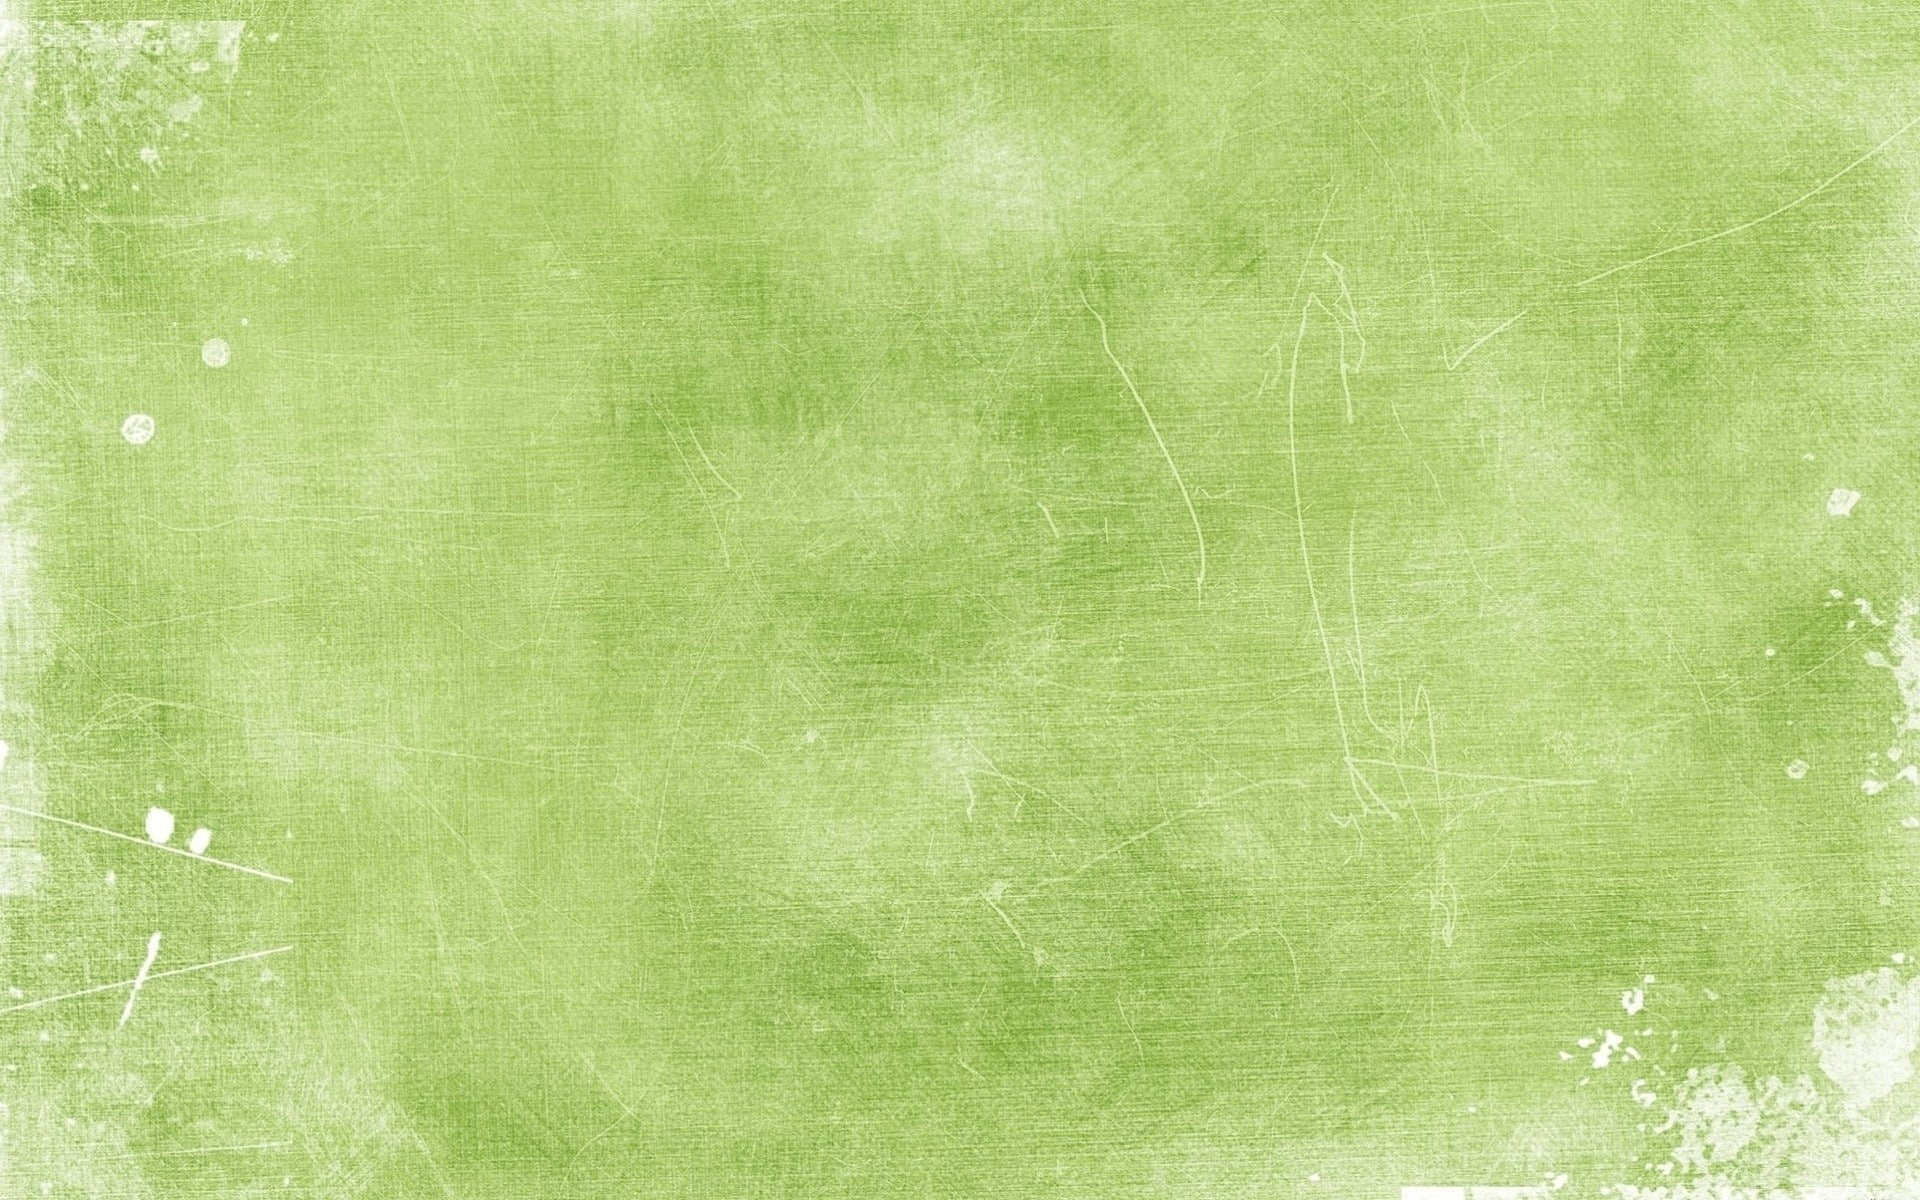 Stains, Light, Background, Texture, backgrounds, green color